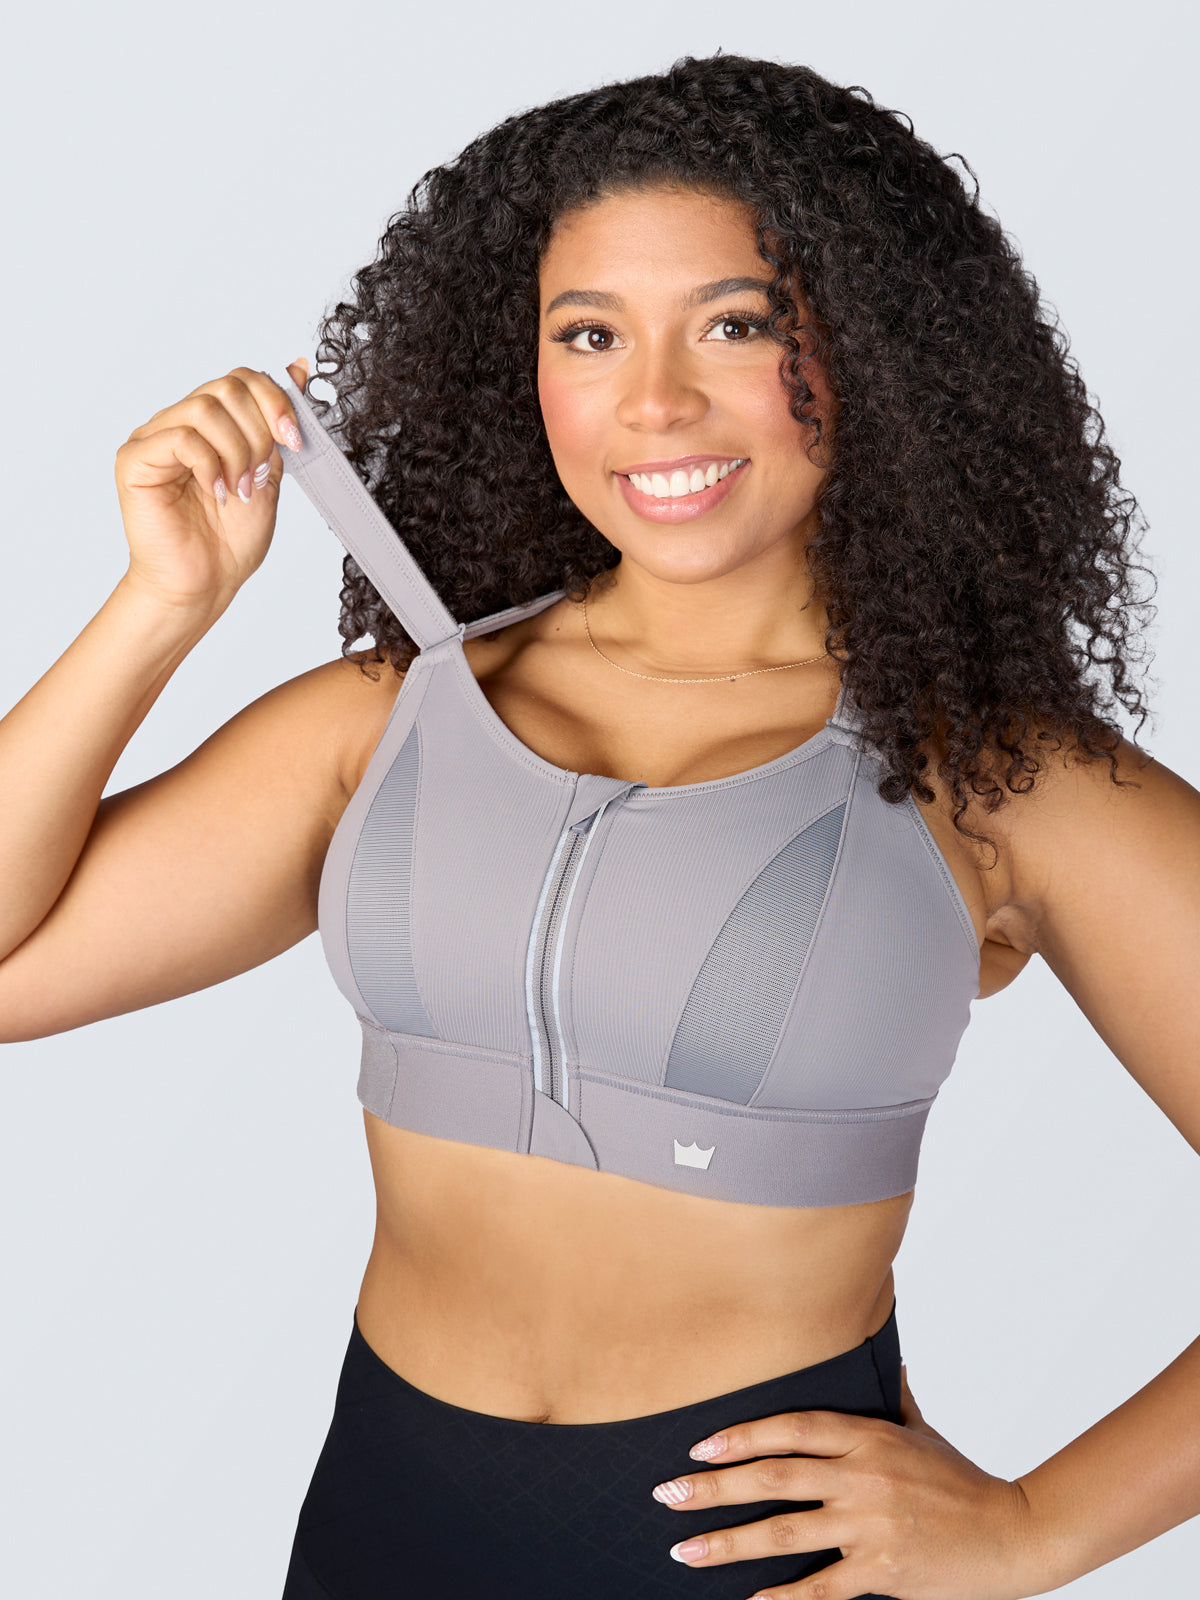 50 Shadows of Grey- Best Sports Bras for Support- Removable Cups